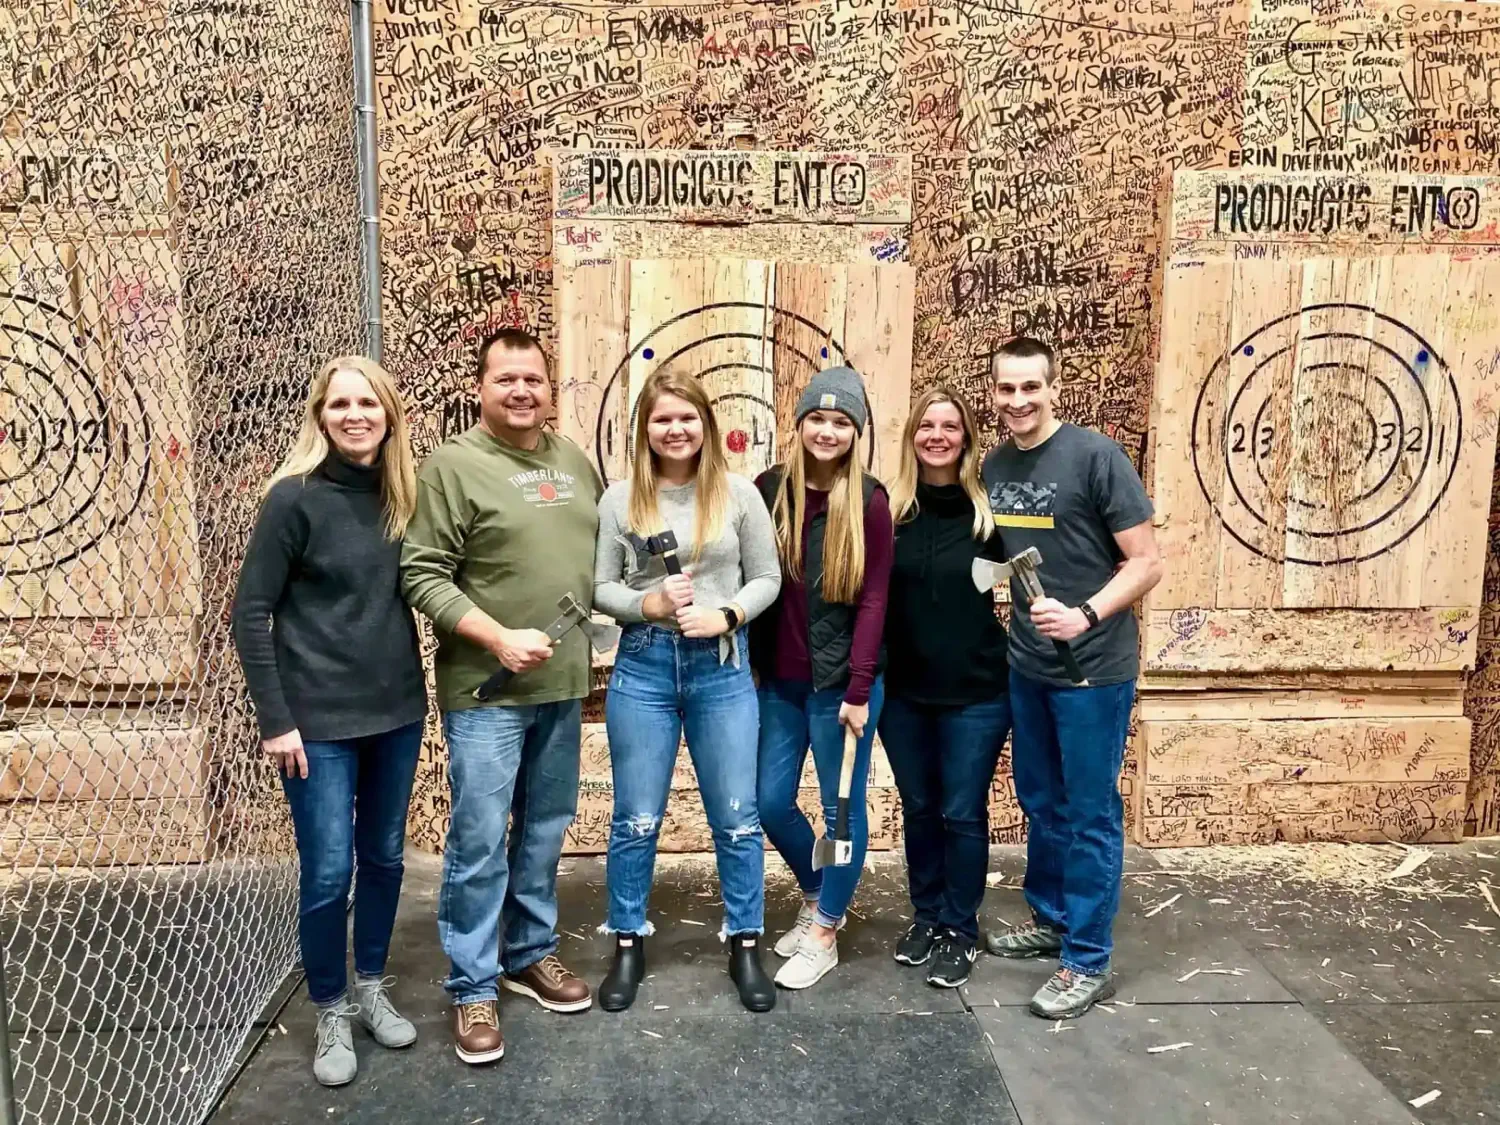 We are all stoked to be axe throwing